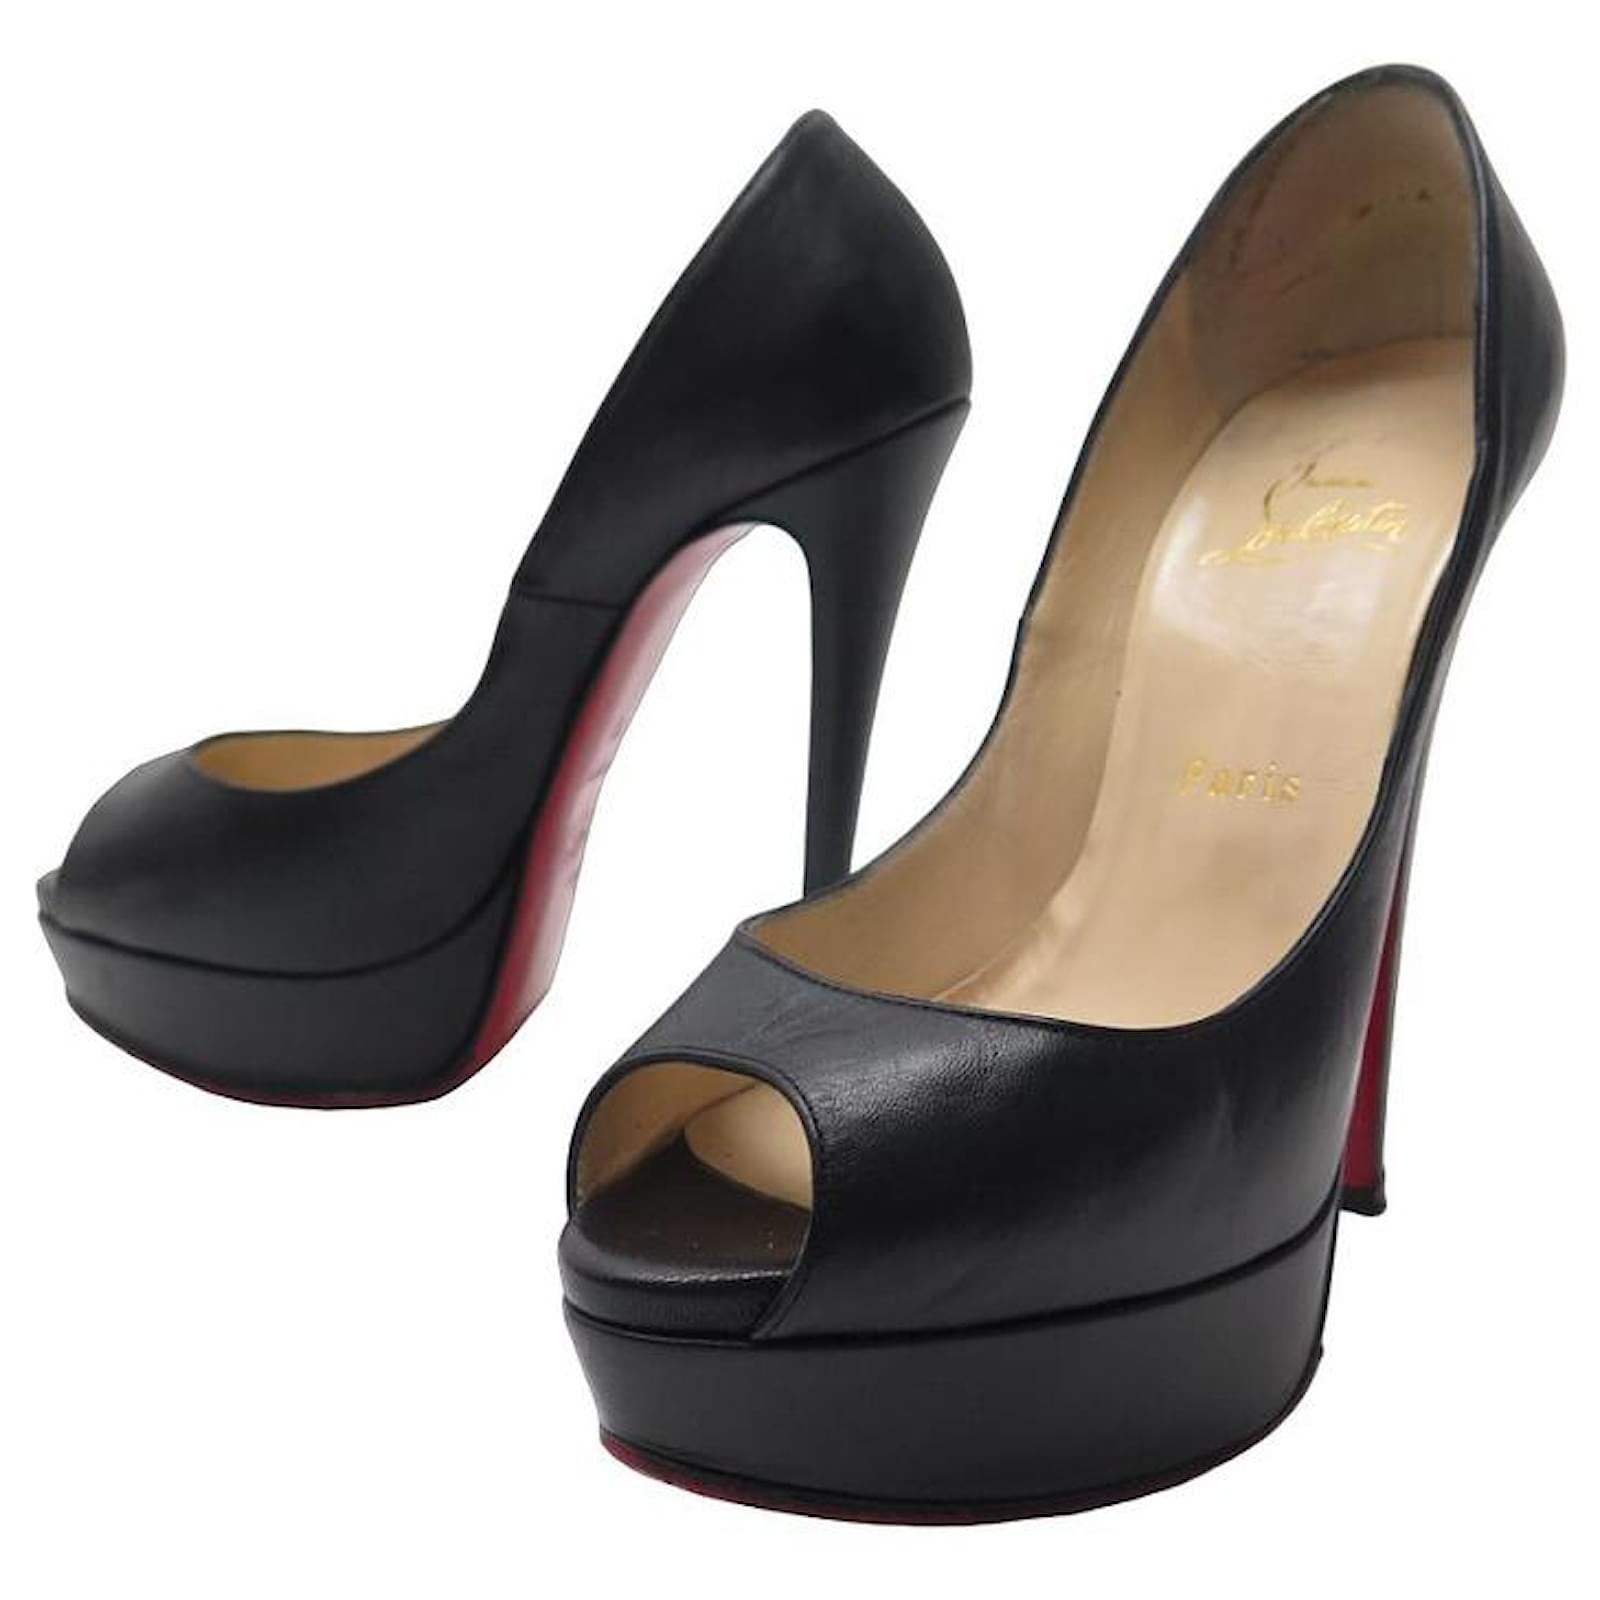 CHRISTIAN LOUBOUTIN LADY PEEP SHOES 37 PUMPS LEATHER LEATHER SHOES